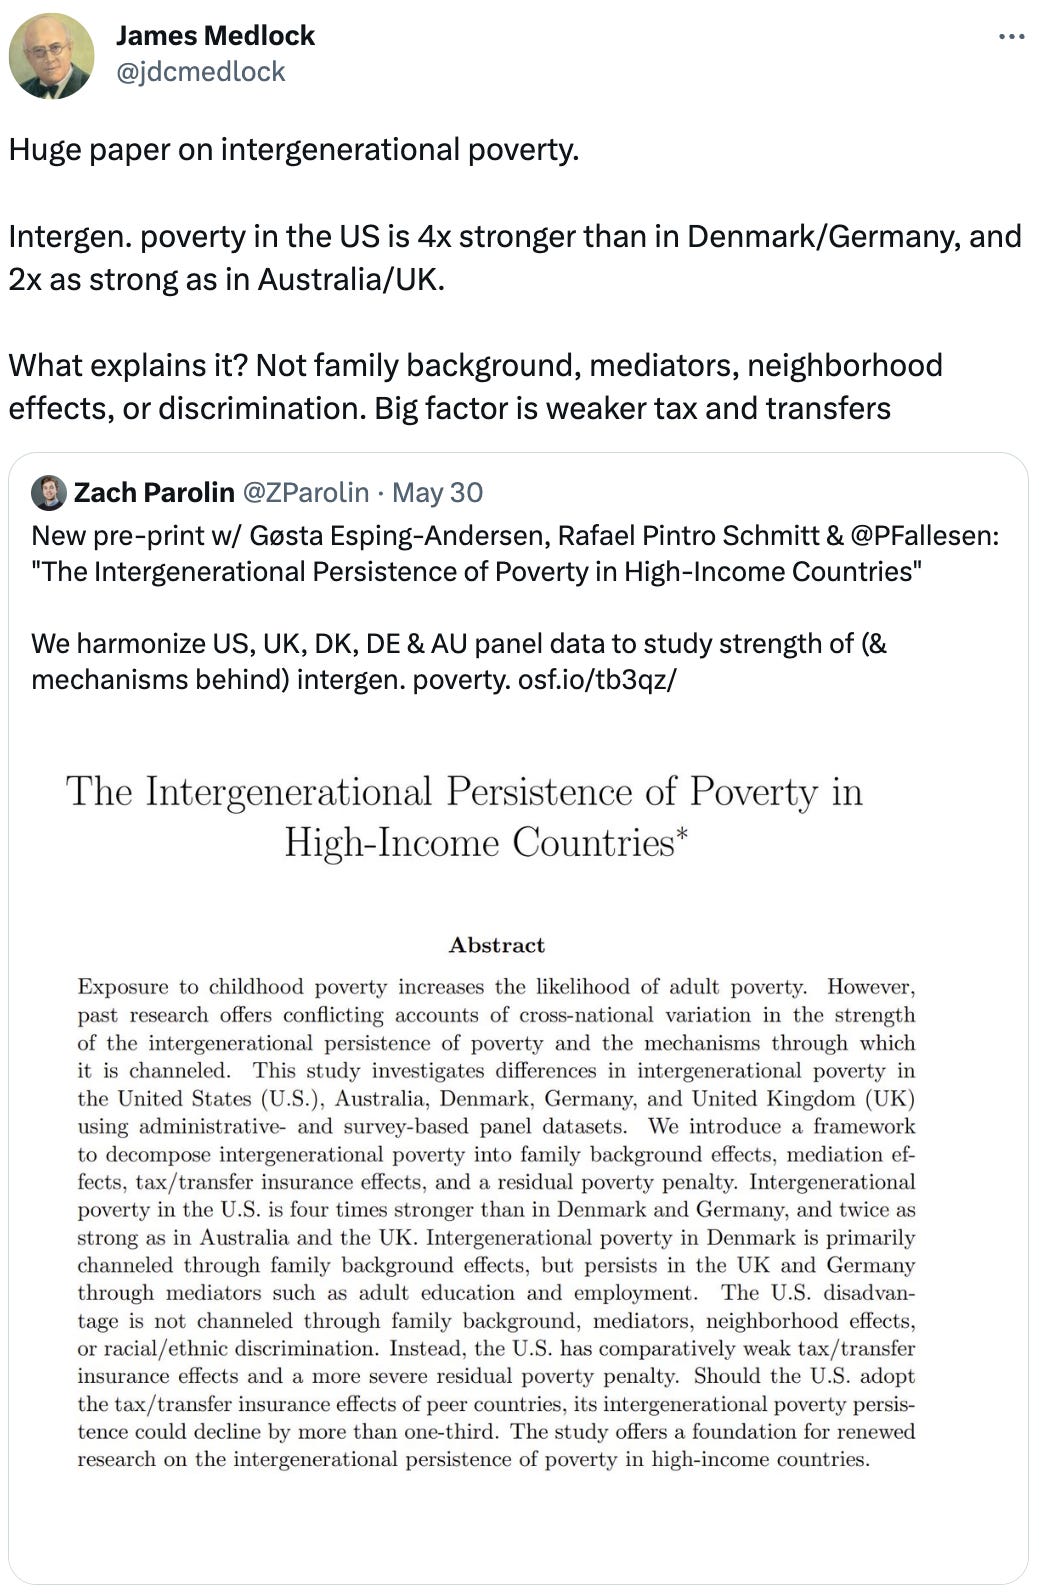  James Medlock @jdcmedlock Huge paper on intergenerational poverty.   Intergen. poverty in the US is 4x stronger than in Denmark/Germany, and 2x as strong as in Australia/UK.  What explains it? Not family background, mediators, neighborhood effects, or discrimination. Big factor is weaker tax and transfers Quote Tweet Zach Parolin @ZParolin · May 30 New pre-print w/ Gøsta Esping-Andersen, Rafael Pintro Schmitt & @PFallesen: "The Intergenerational Persistence of Poverty in High-Income Countries"  We harmonize US, UK, DK, DE & AU panel data to study strength of (& mechanisms behind) intergen. poverty. https://osf.io/tb3qz/